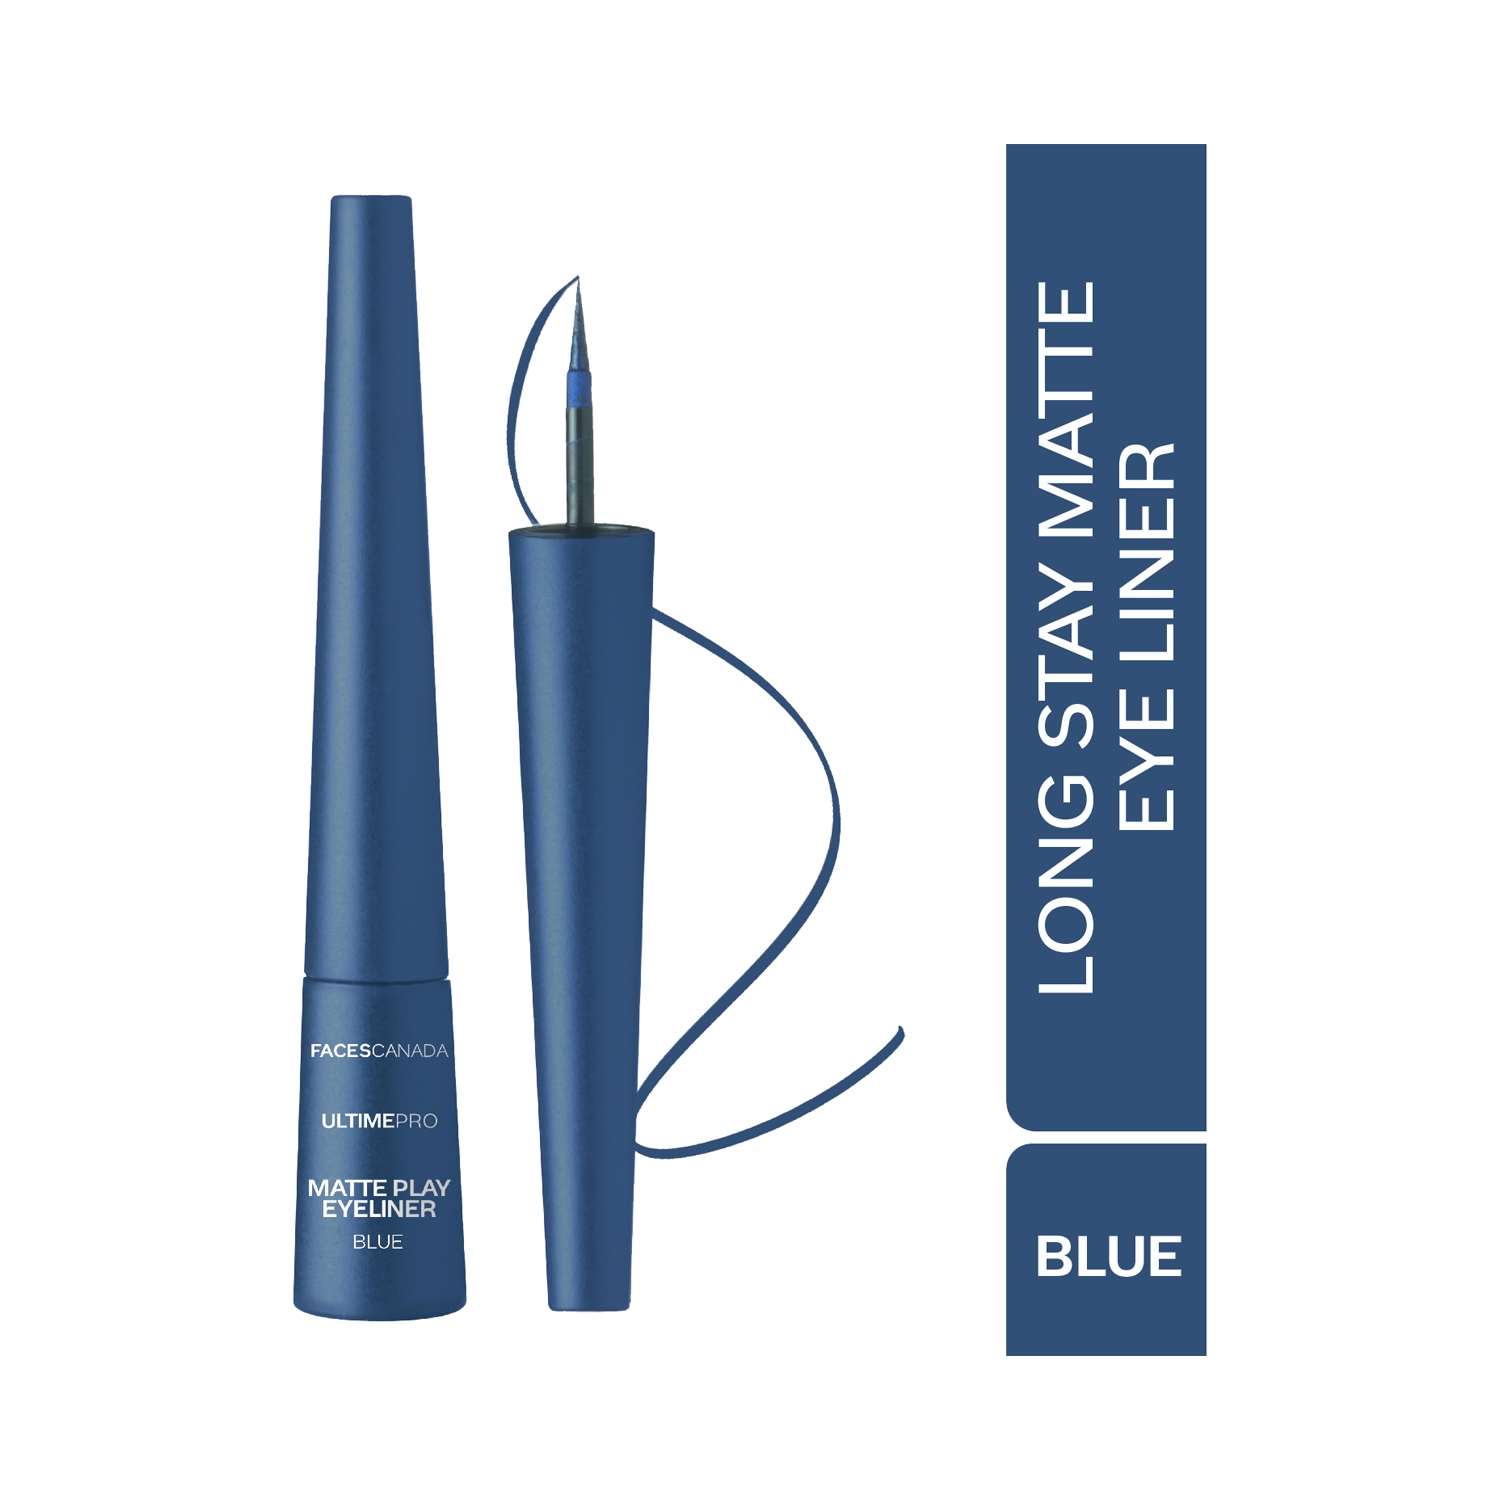 Faces Canada | Faces Canada Ultime Pro Matte Play Eyeliner - Sapphire (2.5ml)